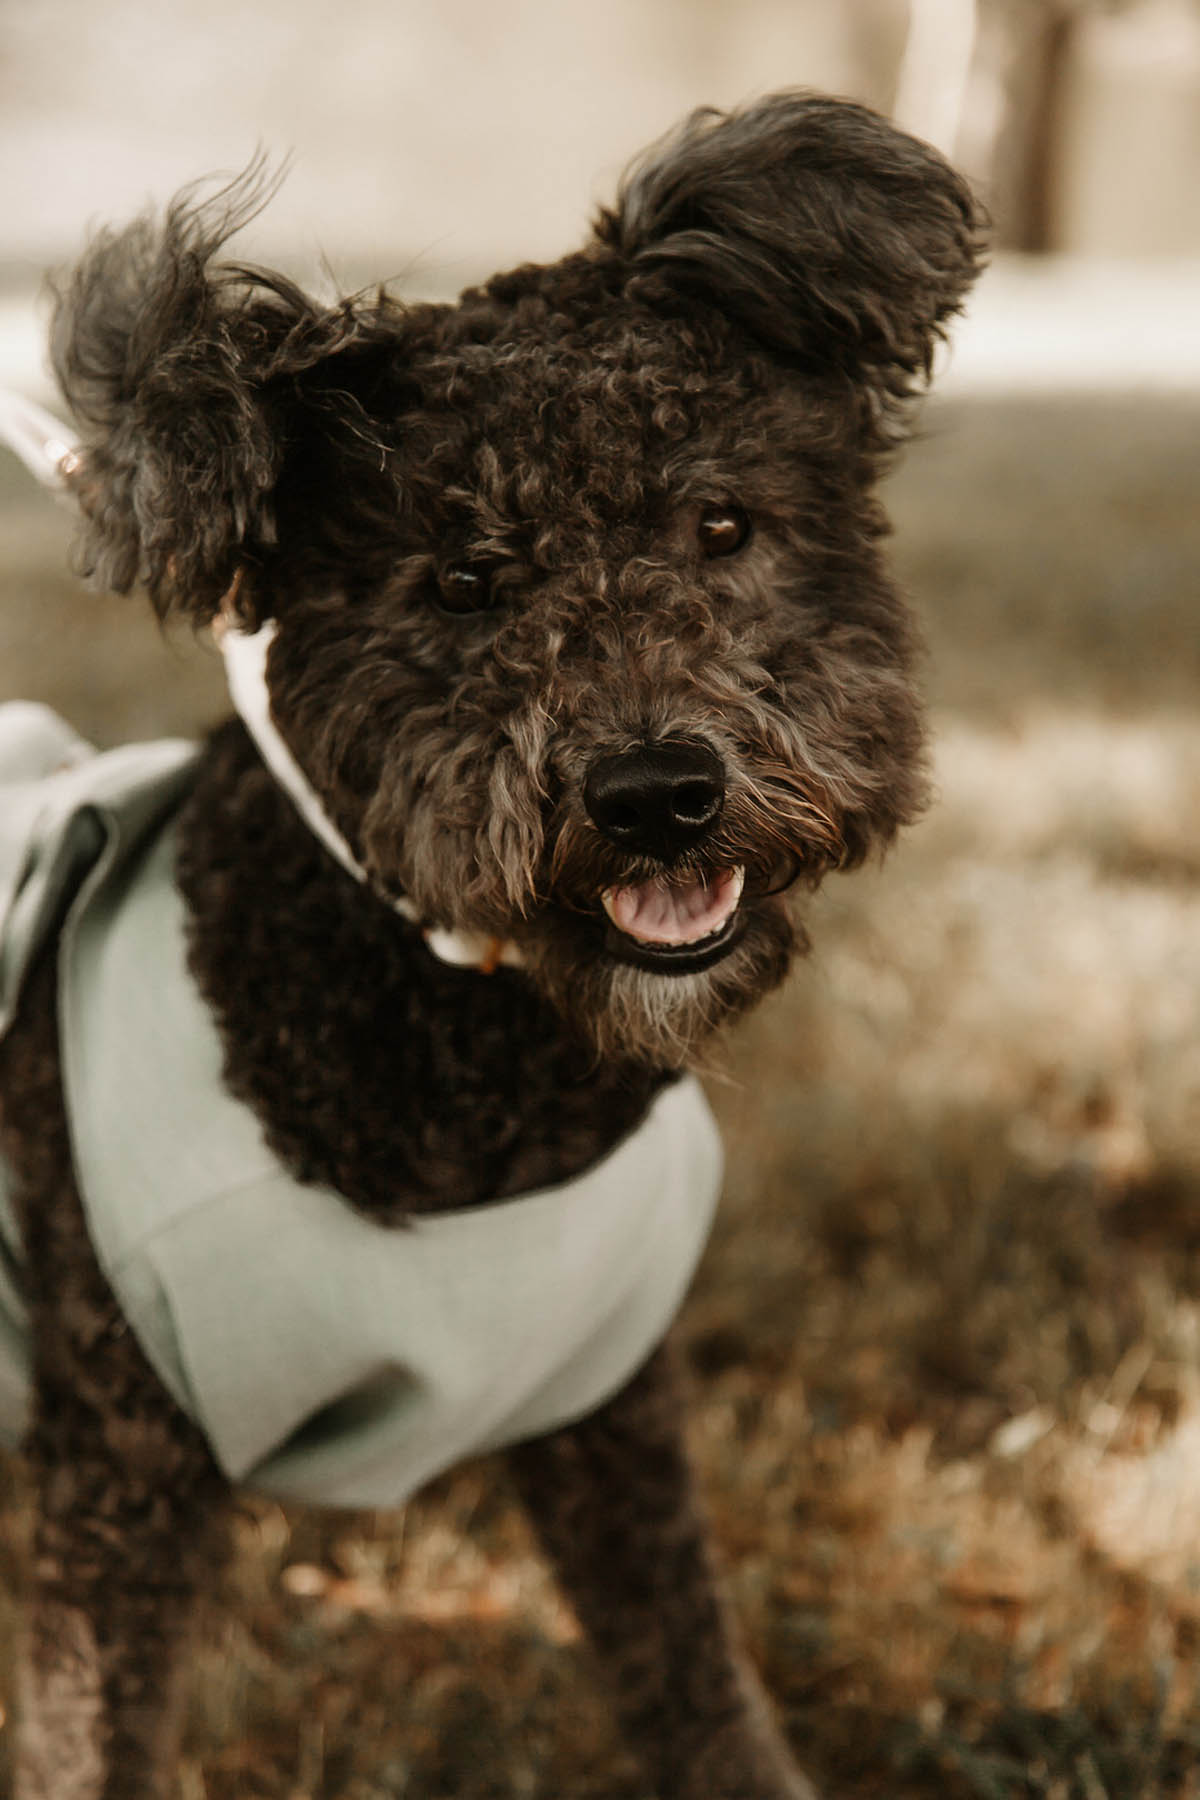 A fluffy black dog in a gray suit smiles for the camera